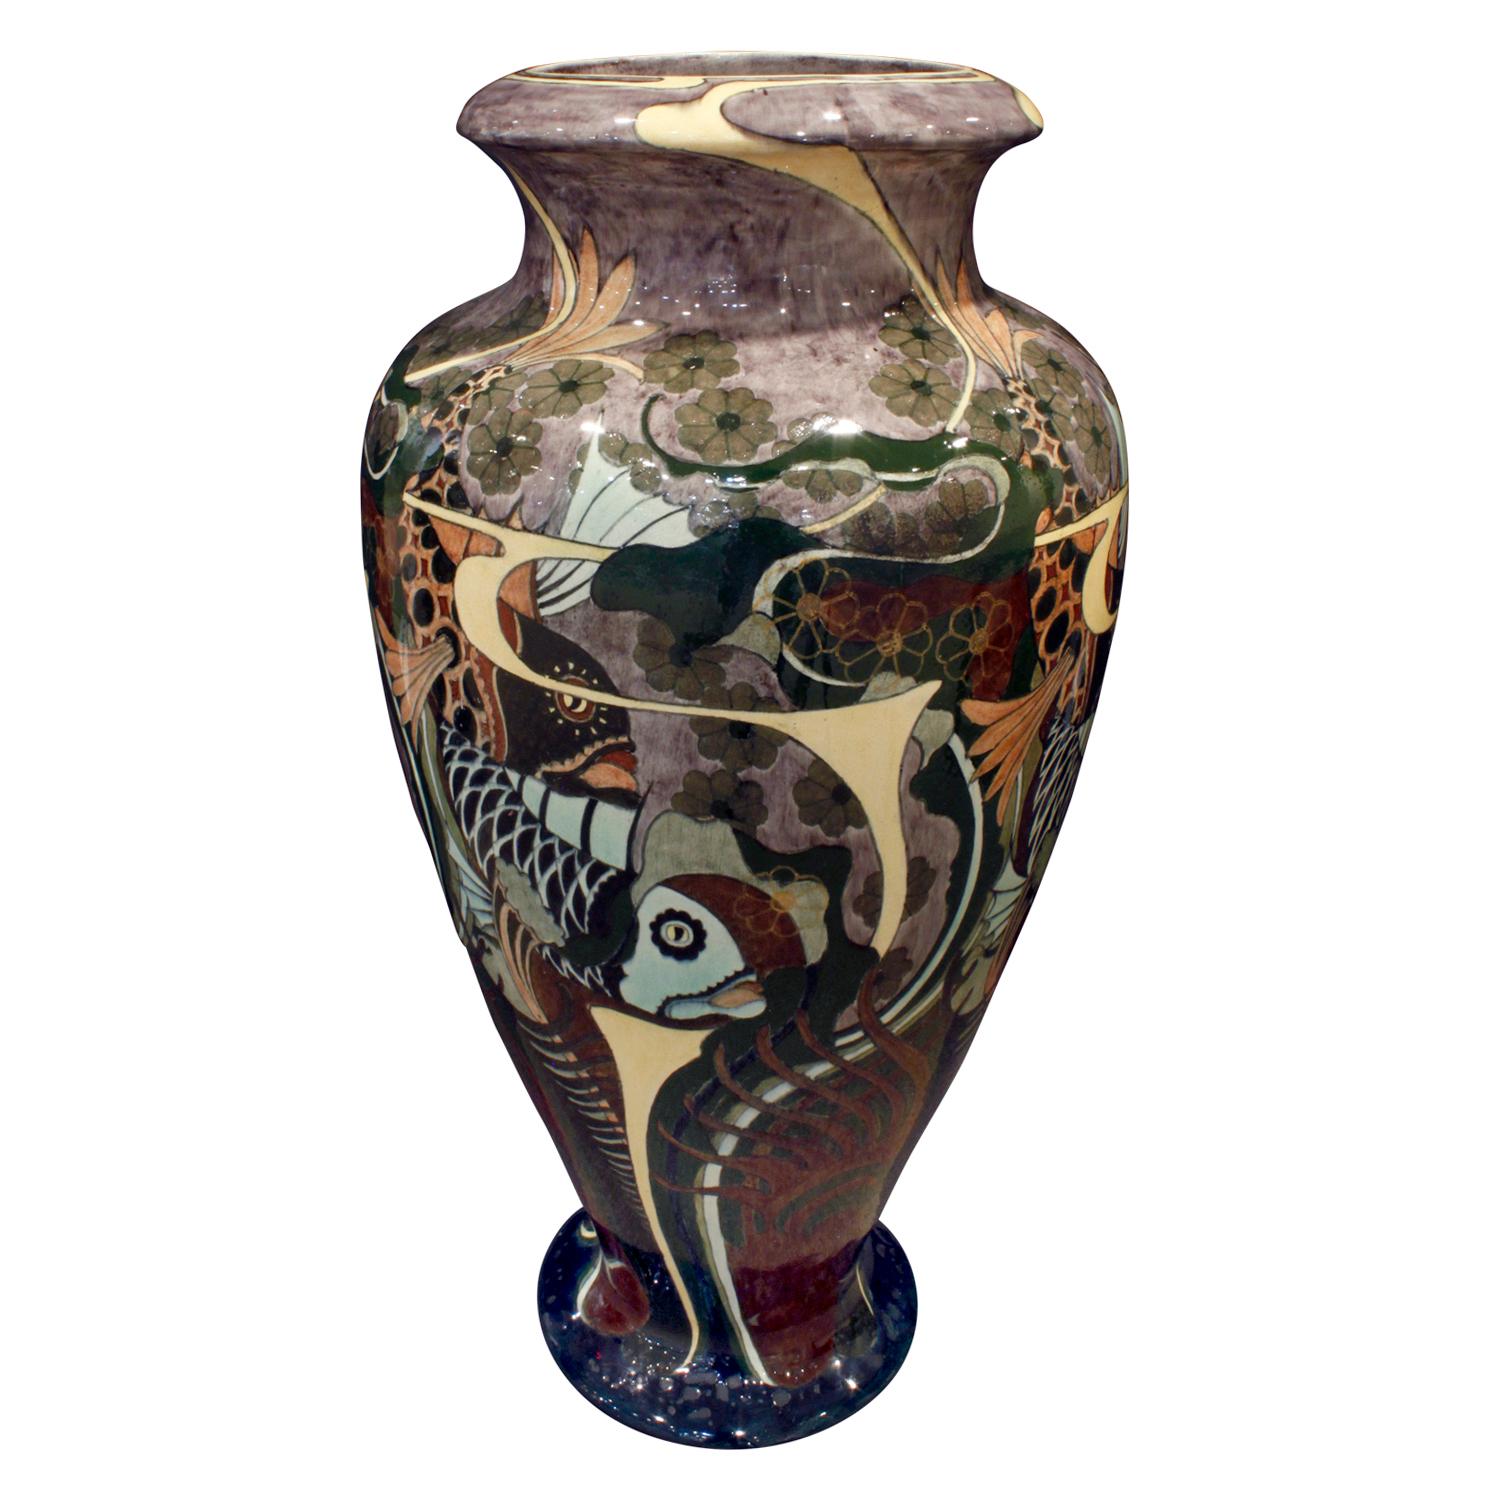 Pair of monumental Art Nouveau hand painted ceramic vases by N.S.A. Brantjes & Co, Holland, circa 1896 (signed on each on bottom 